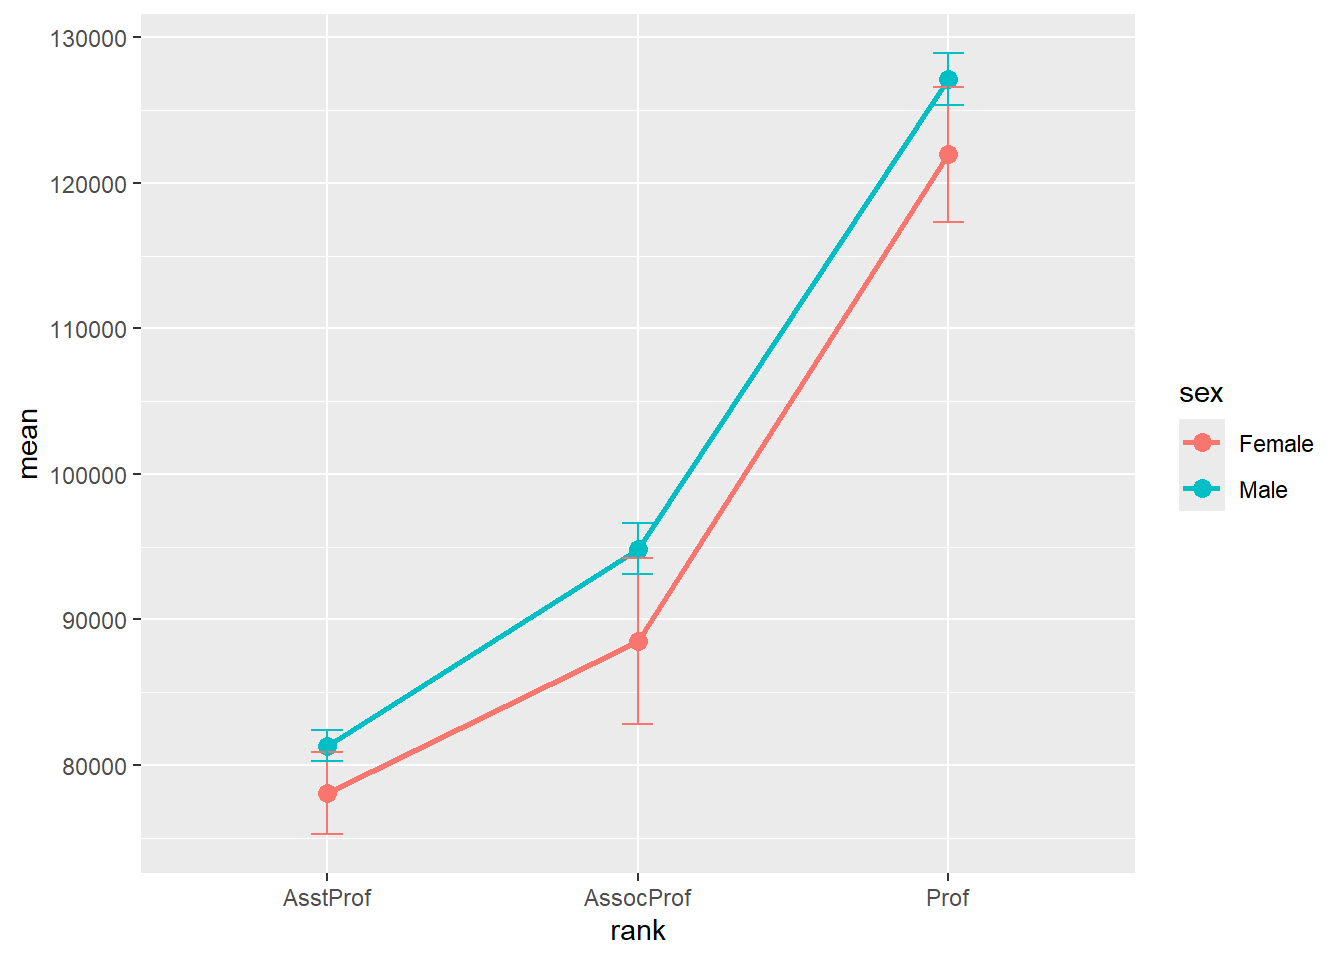 Mean plots with standard error bars by sex